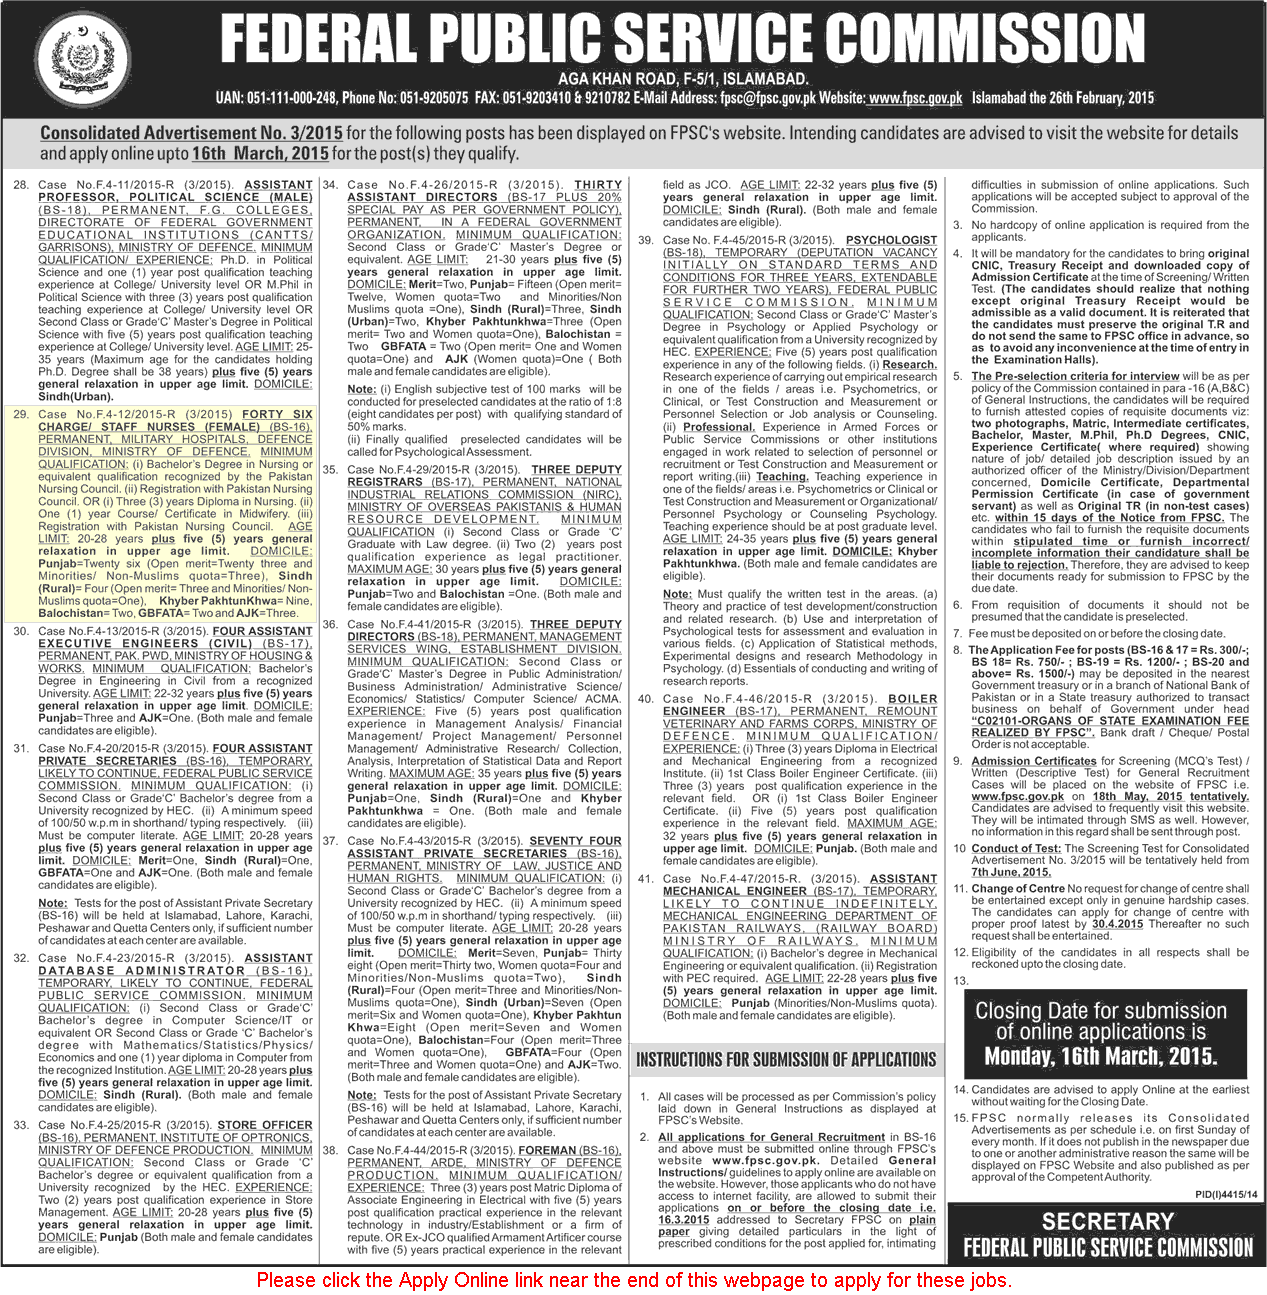 FPSC Nursing Jobs 2015 March in Military Hospitals Ministry of Defence Pakistan Charge / Staff Nurses